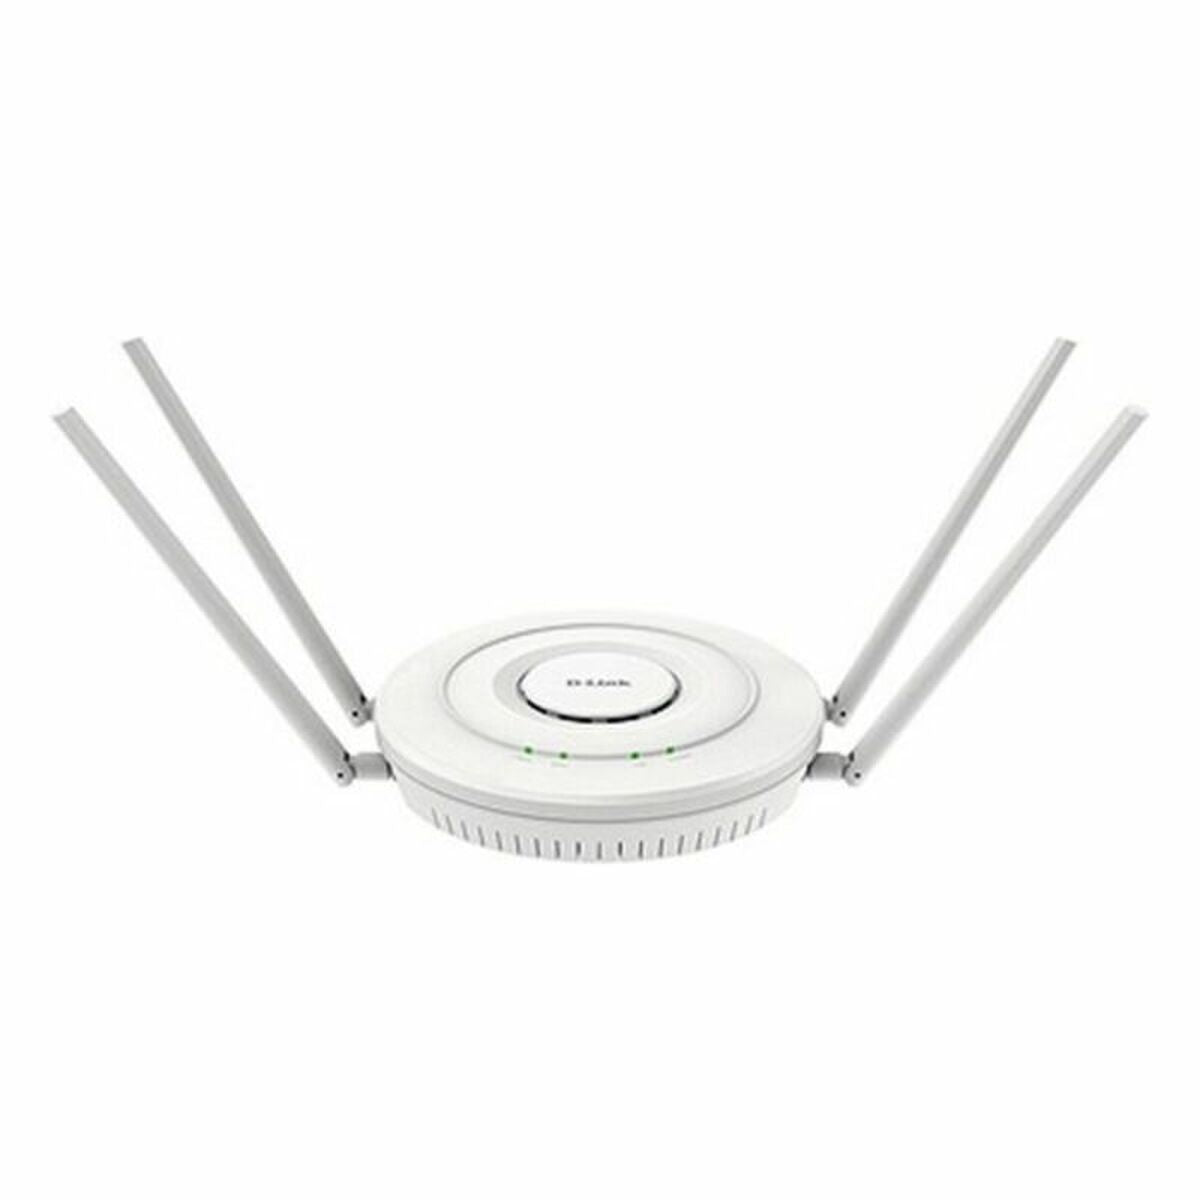 Access Point Repeater D-Link DWL-6610APE          5 GHz LAN 867 Mbps White, D-Link, Computing, Network devices, access-point-repeater-d-link-dwl-6610ape-5-ghz-lan-867-mbps-white, Brand_D-Link, category-reference-2609, category-reference-2803, category-reference-2820, category-reference-t-19685, category-reference-t-19914, Condition_NEW, networks/wiring, Price_200 - 300, RiotNook